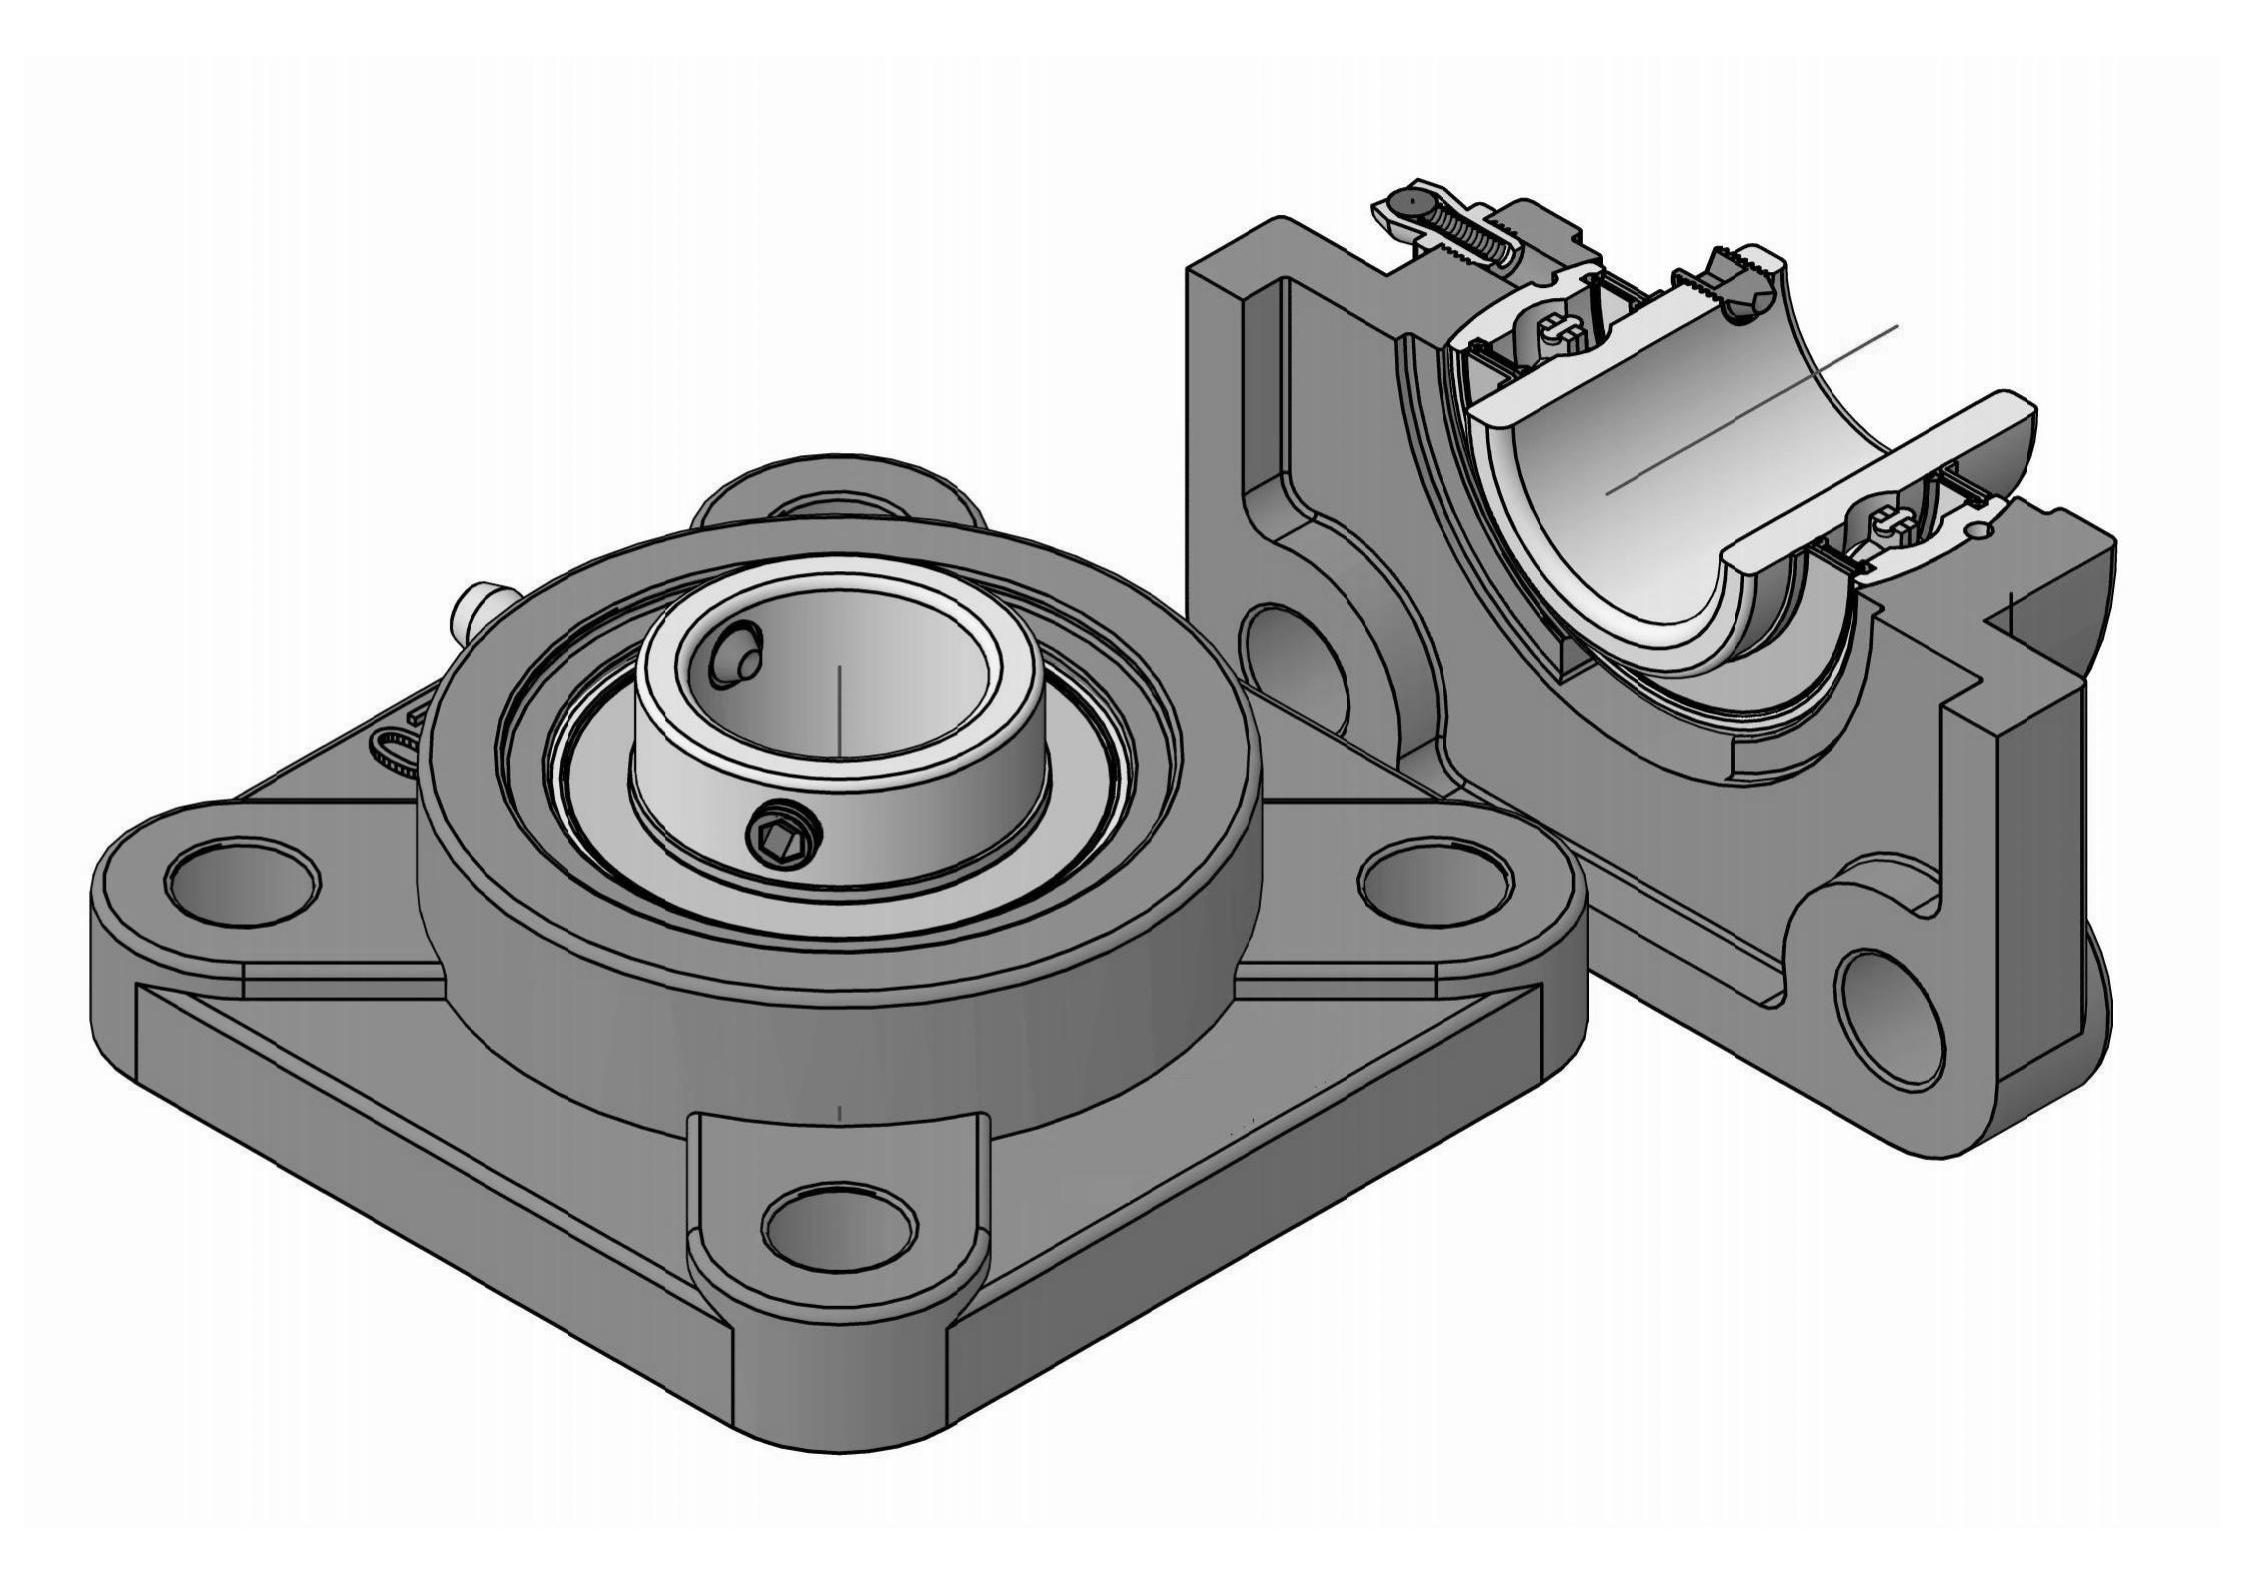 UCFX12-38 four Bolt Square flange bearing units with 2-3/8 inch bore